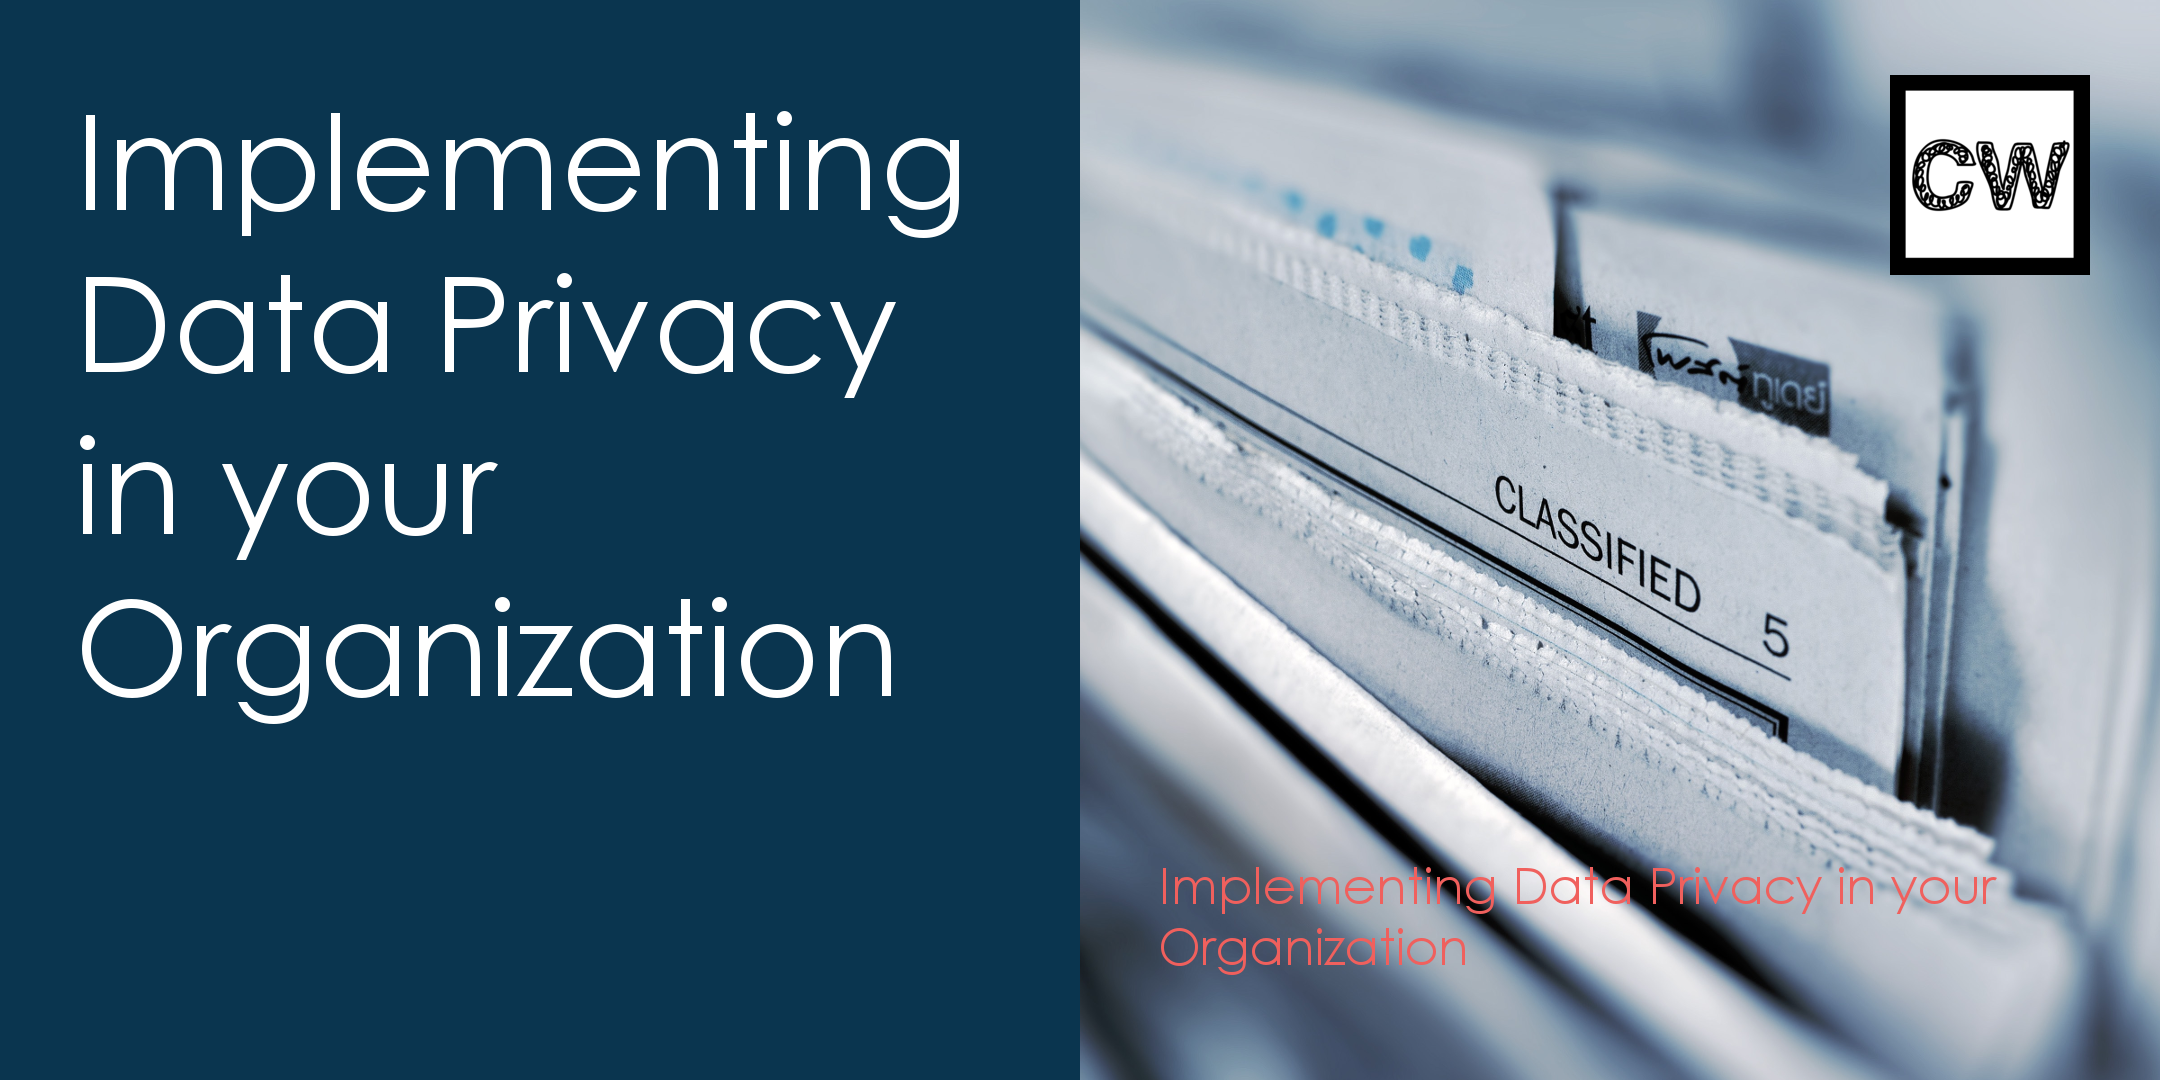 Implementing Data Privacy in your Organization